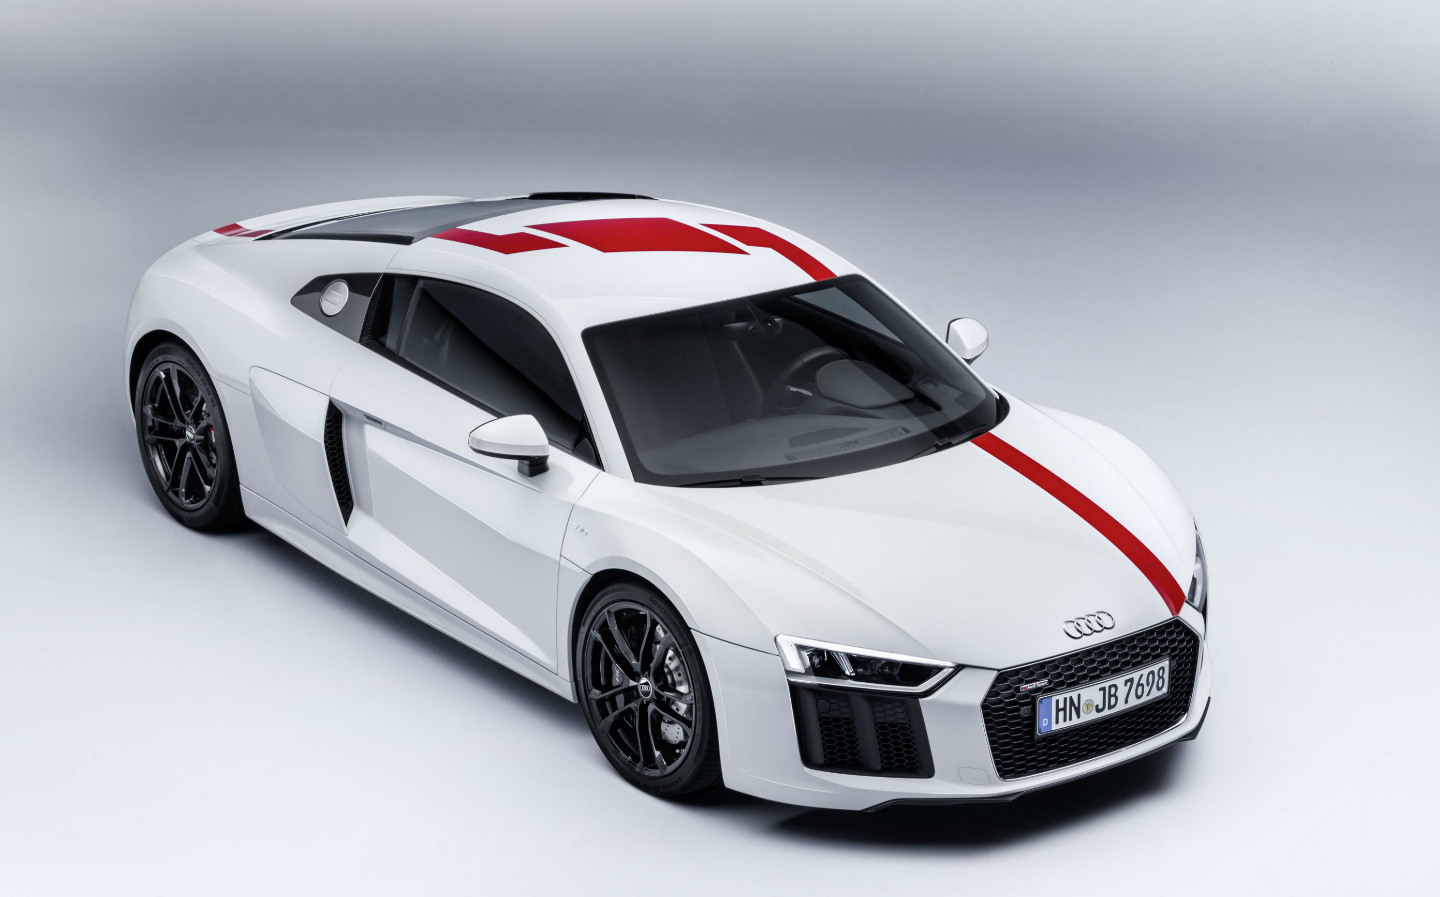 The new Audi R8 V10 RWS is rear-wheel drive and costs £110,000. Only 999 will be made